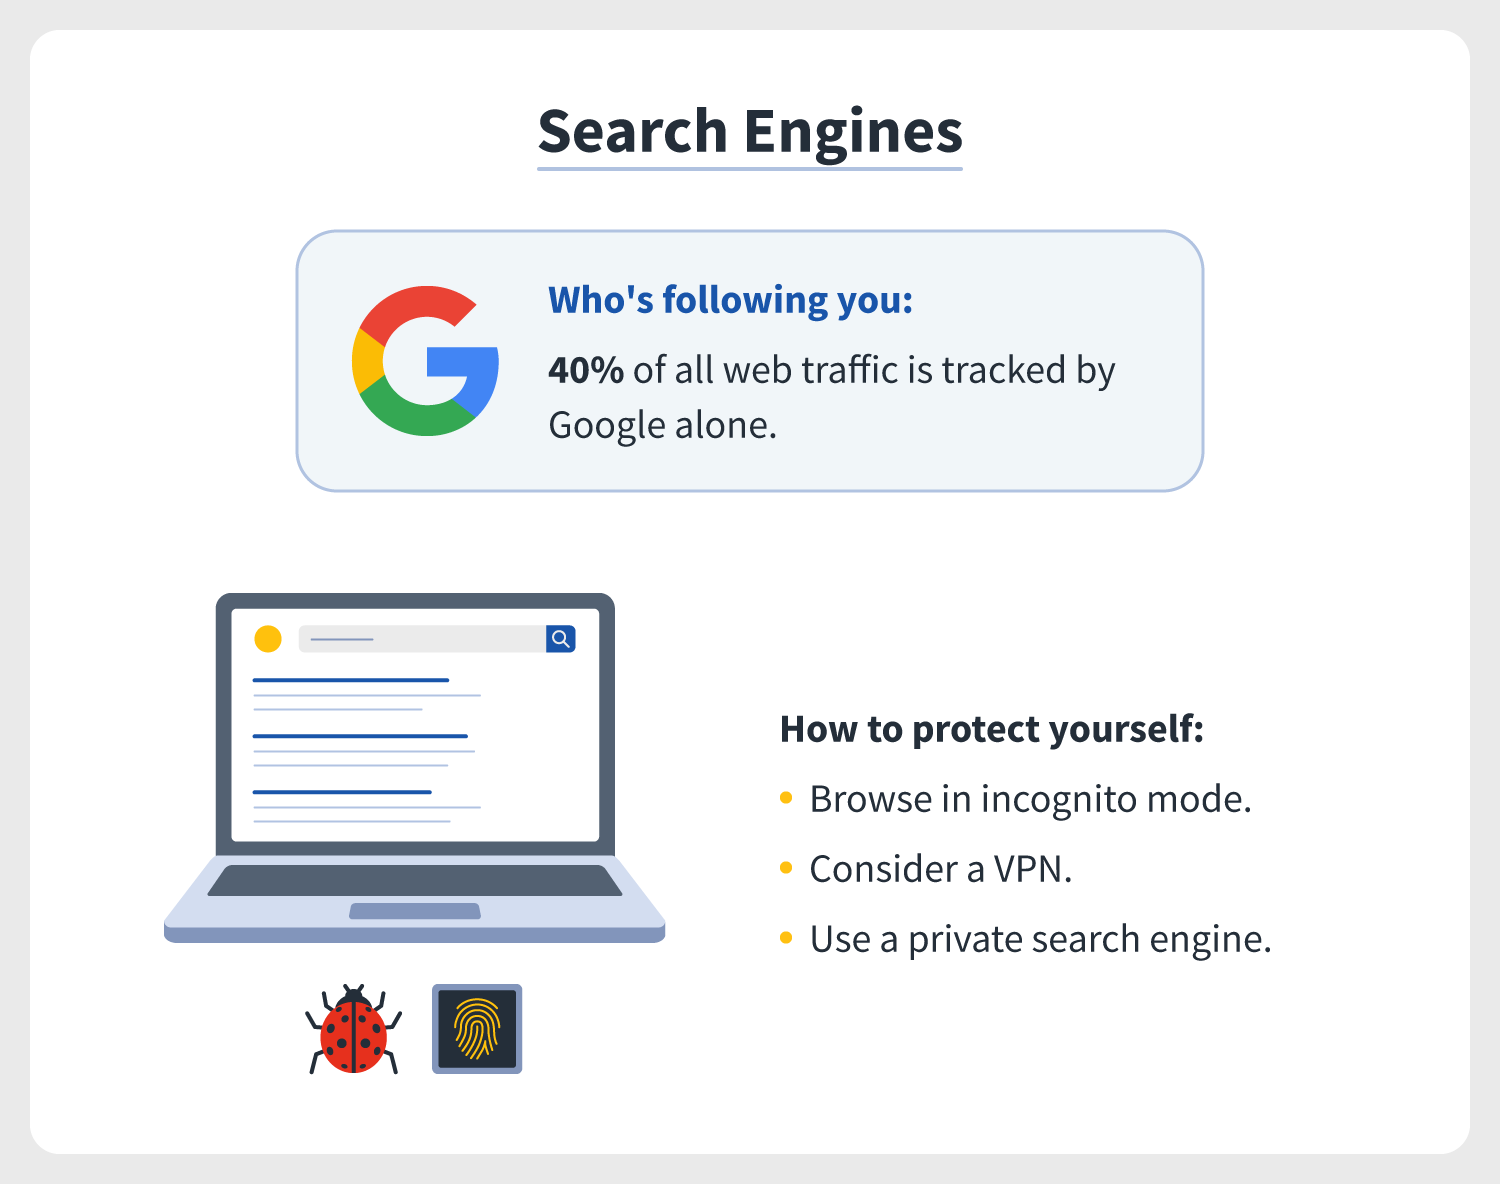 an explanation of how search engines like Google use internet tracking, plus tips for how to not be tracked online